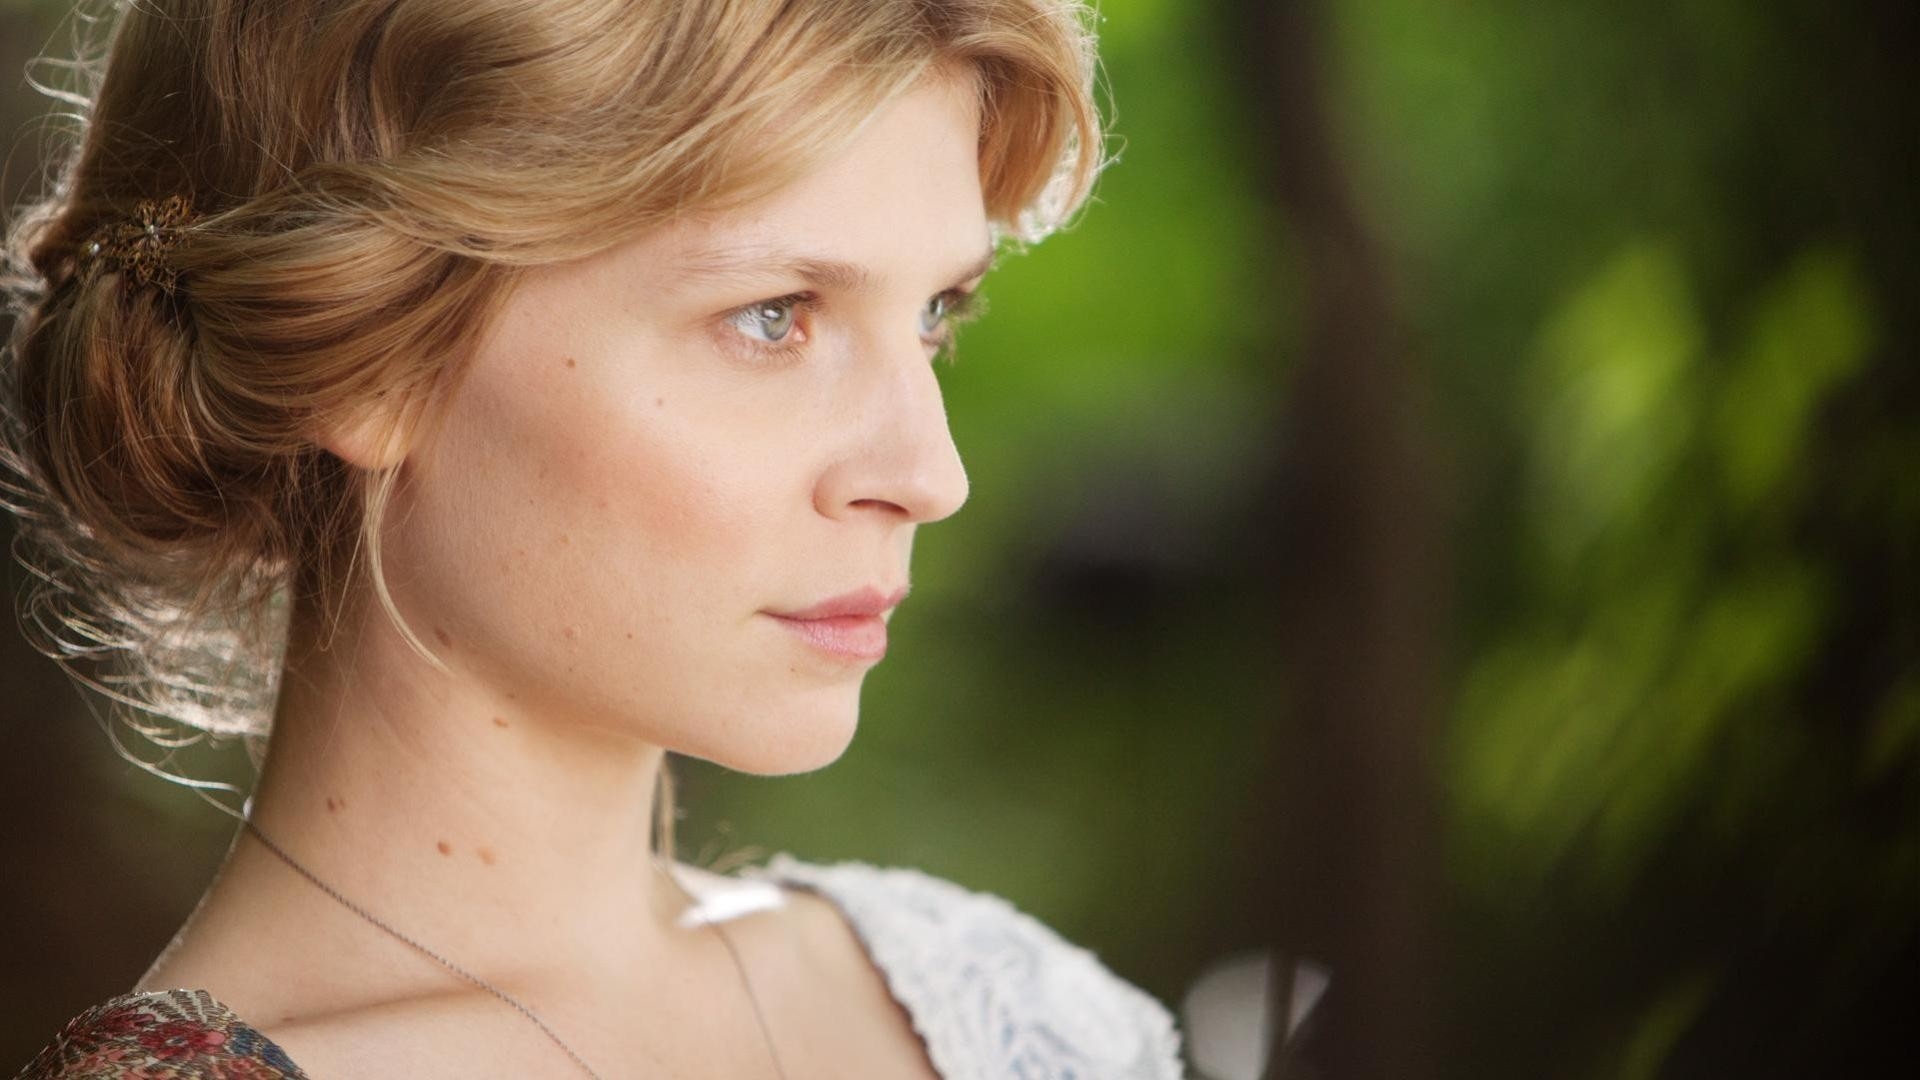 Clemence Poesy Celebrity HD Wallpapers 52262 1920x1080px.